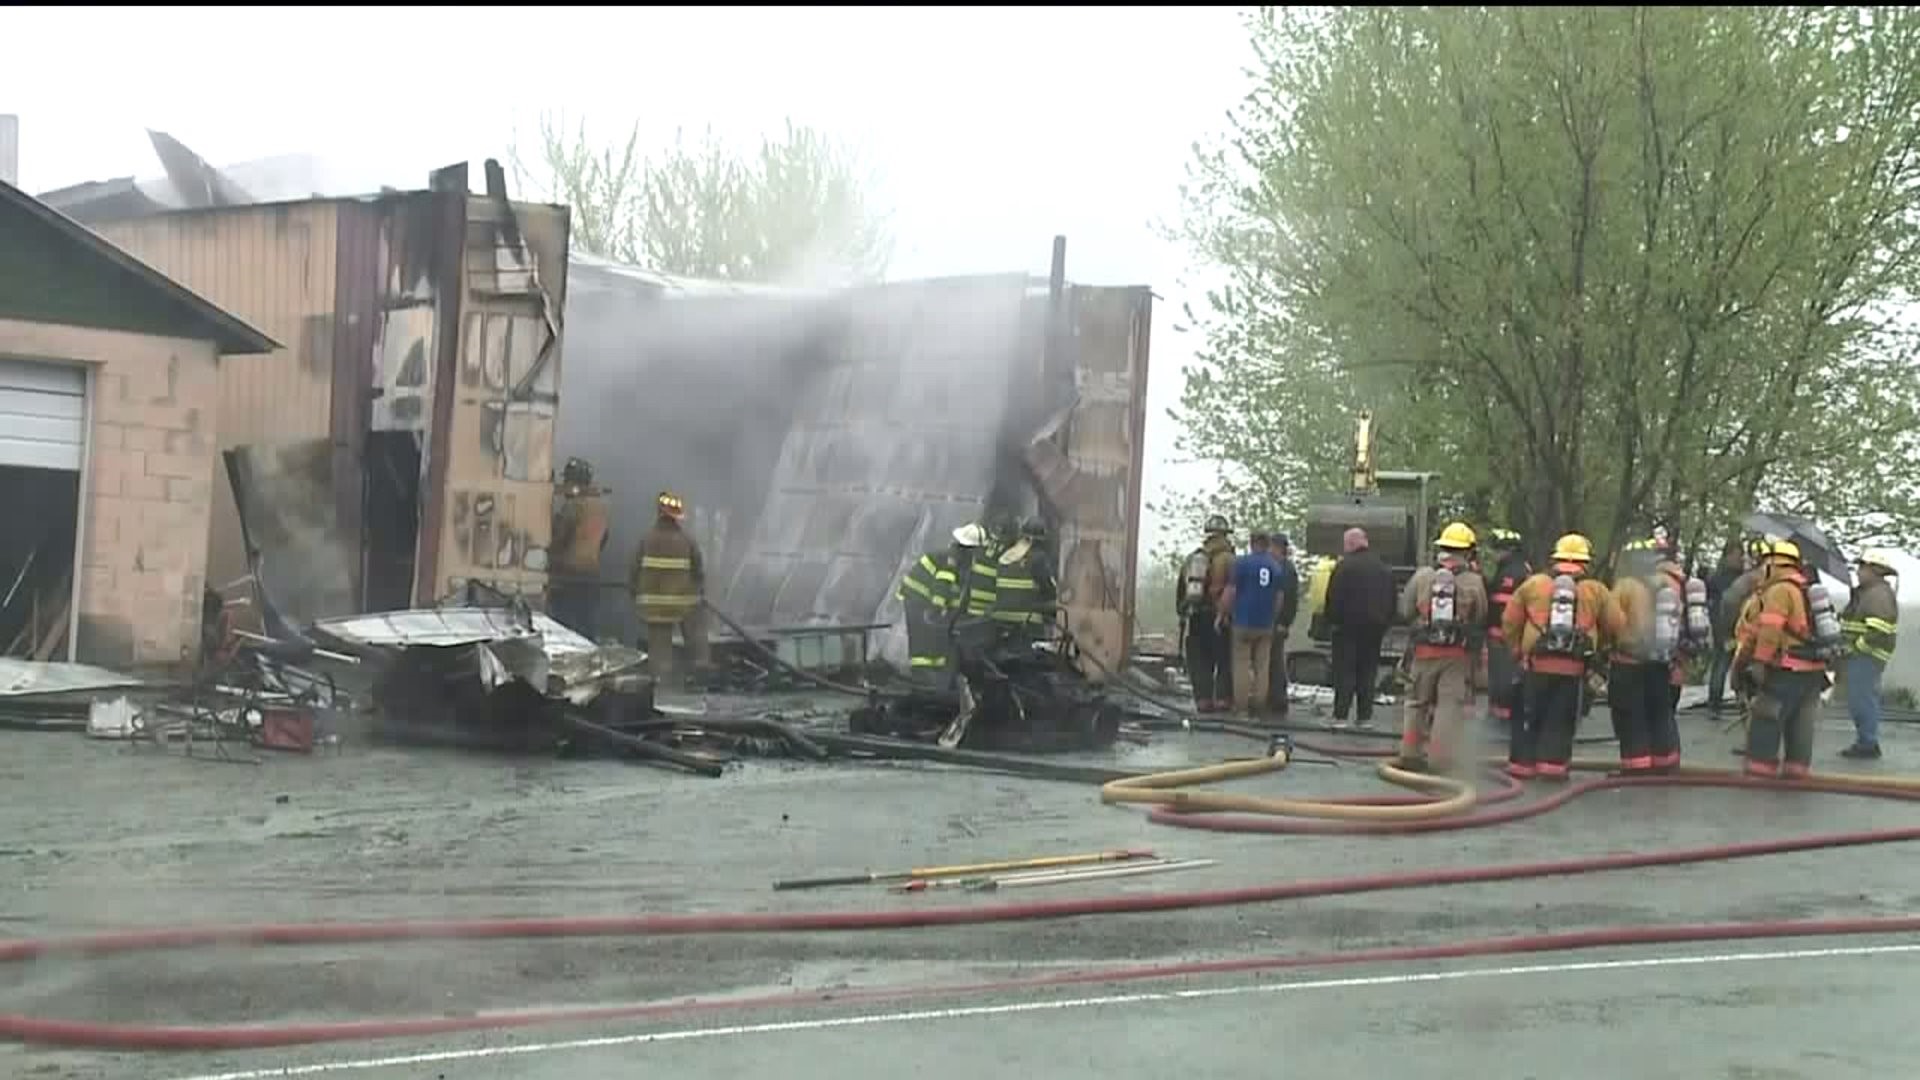 Business Wrecked by Flames in Lackawanna County